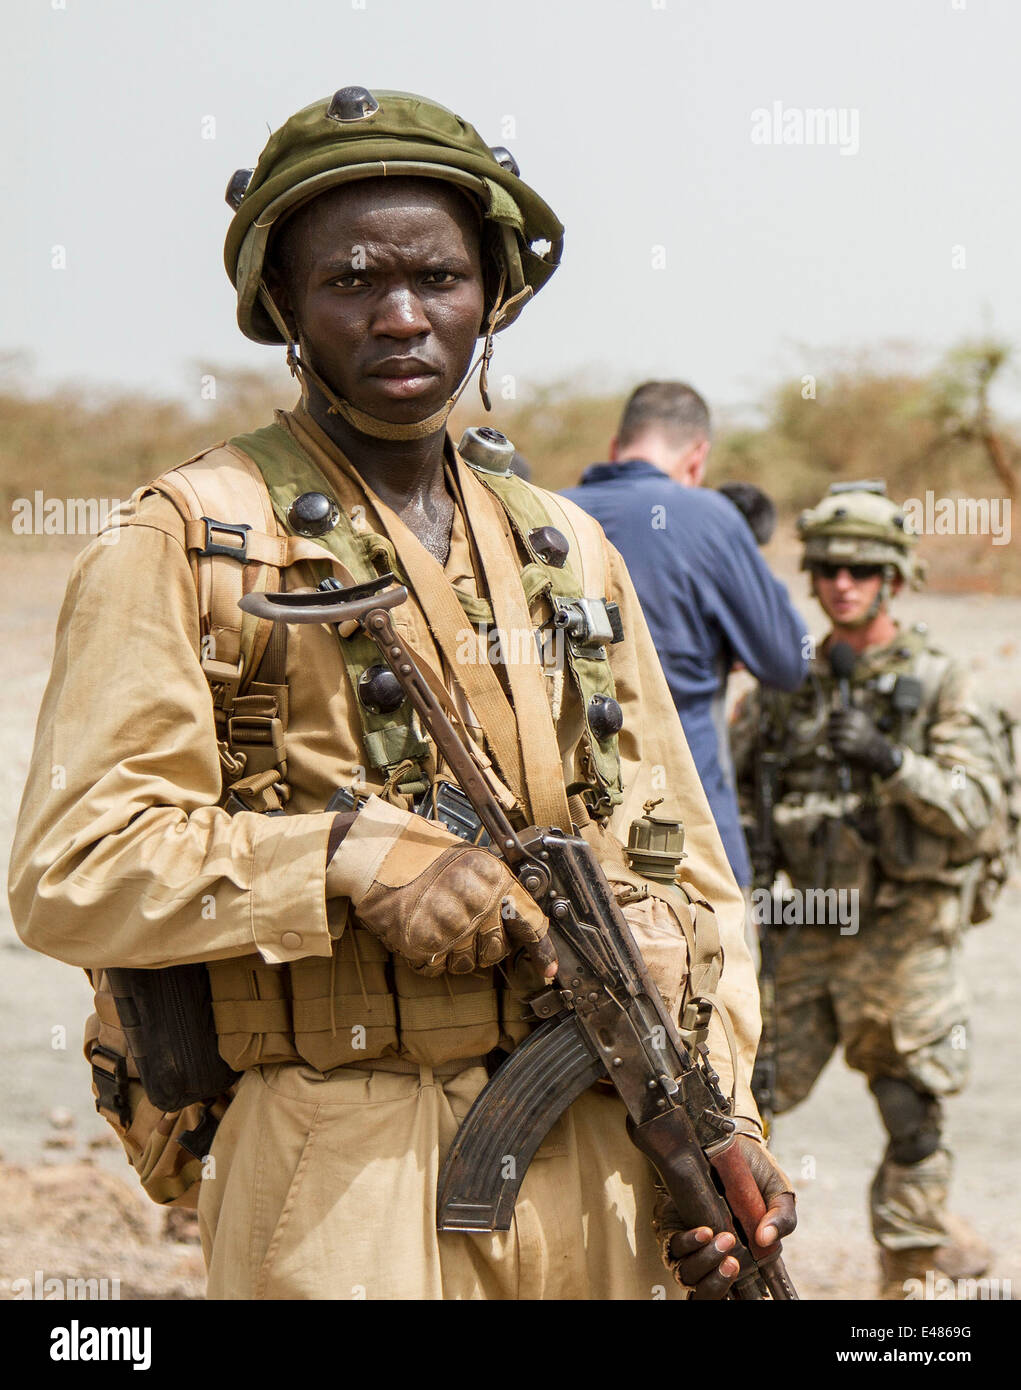 A Burkinabe soldier provides security during joint training with the US Army June 24, 2014 in Dakar, Senegal. Stock Photo